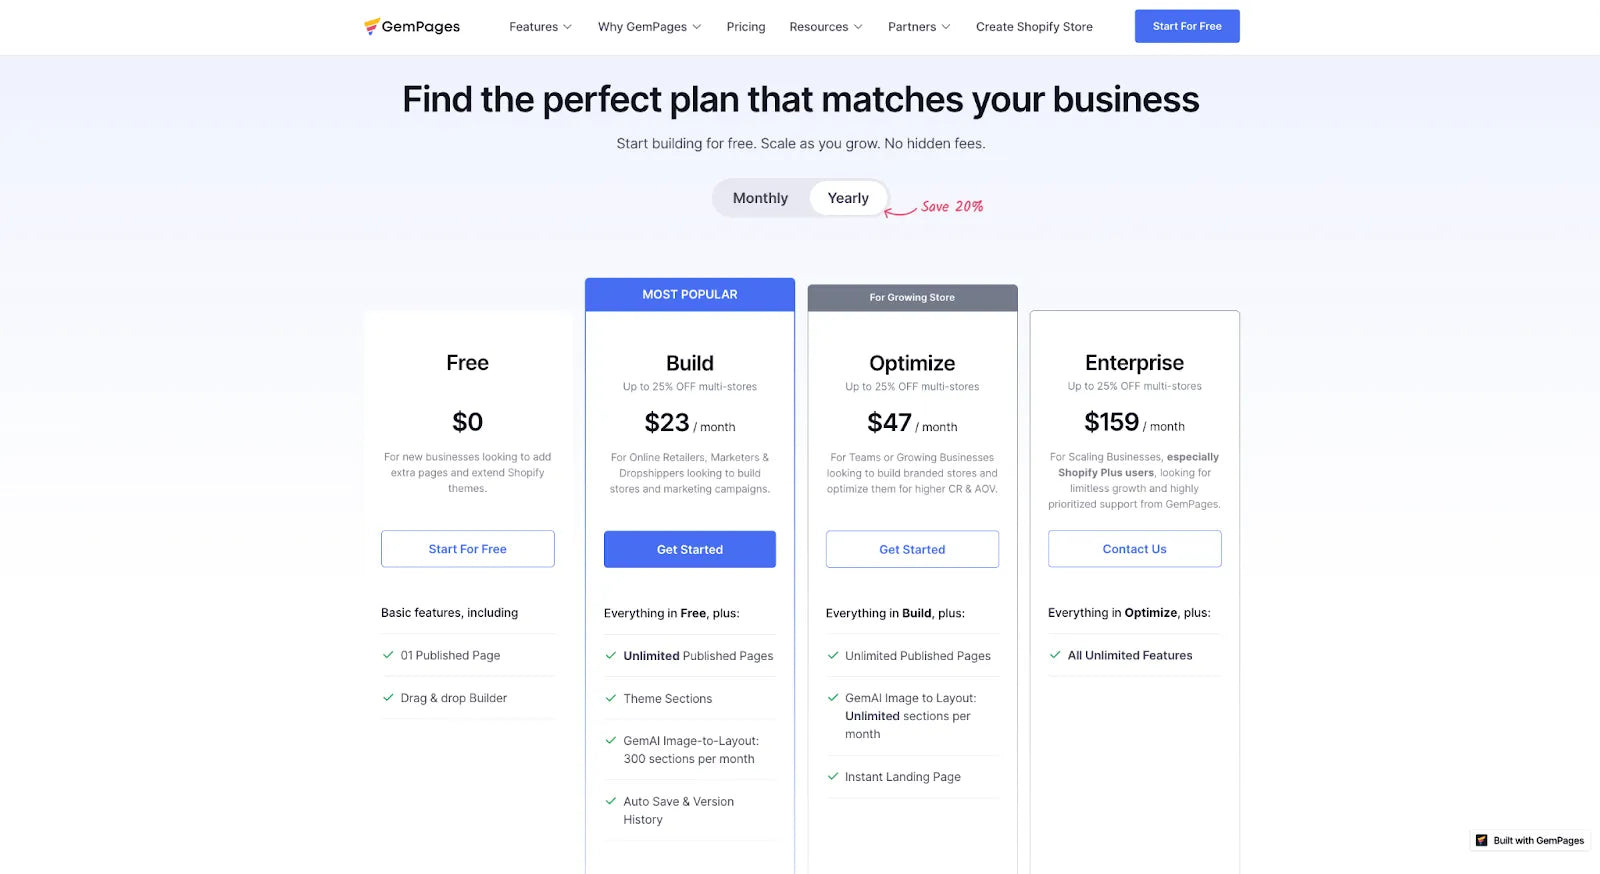 GemPages pricing plans